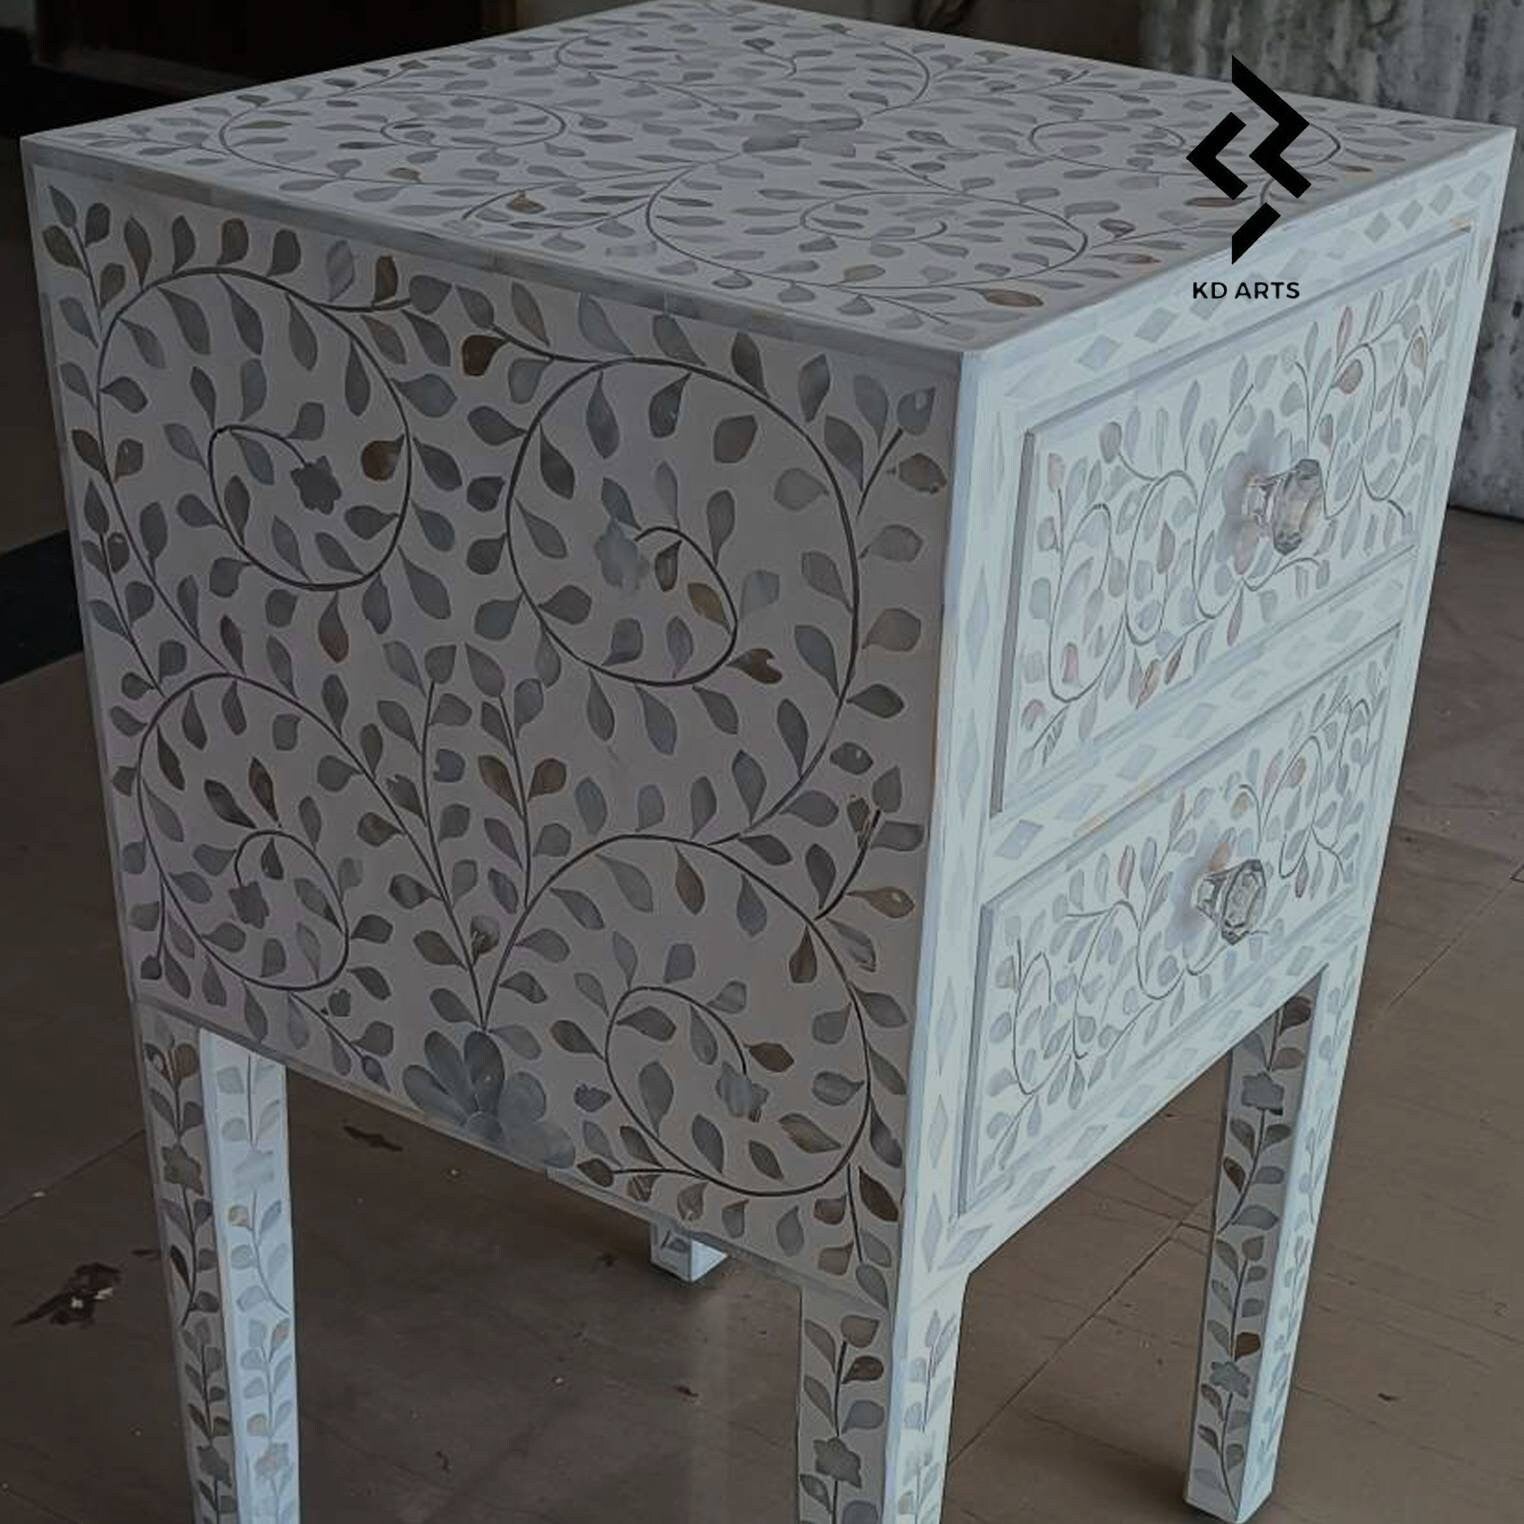 Handmade mother of pearl white bedside table, Mother of pearl white side table, Bone Inlay Handicraft Furniture